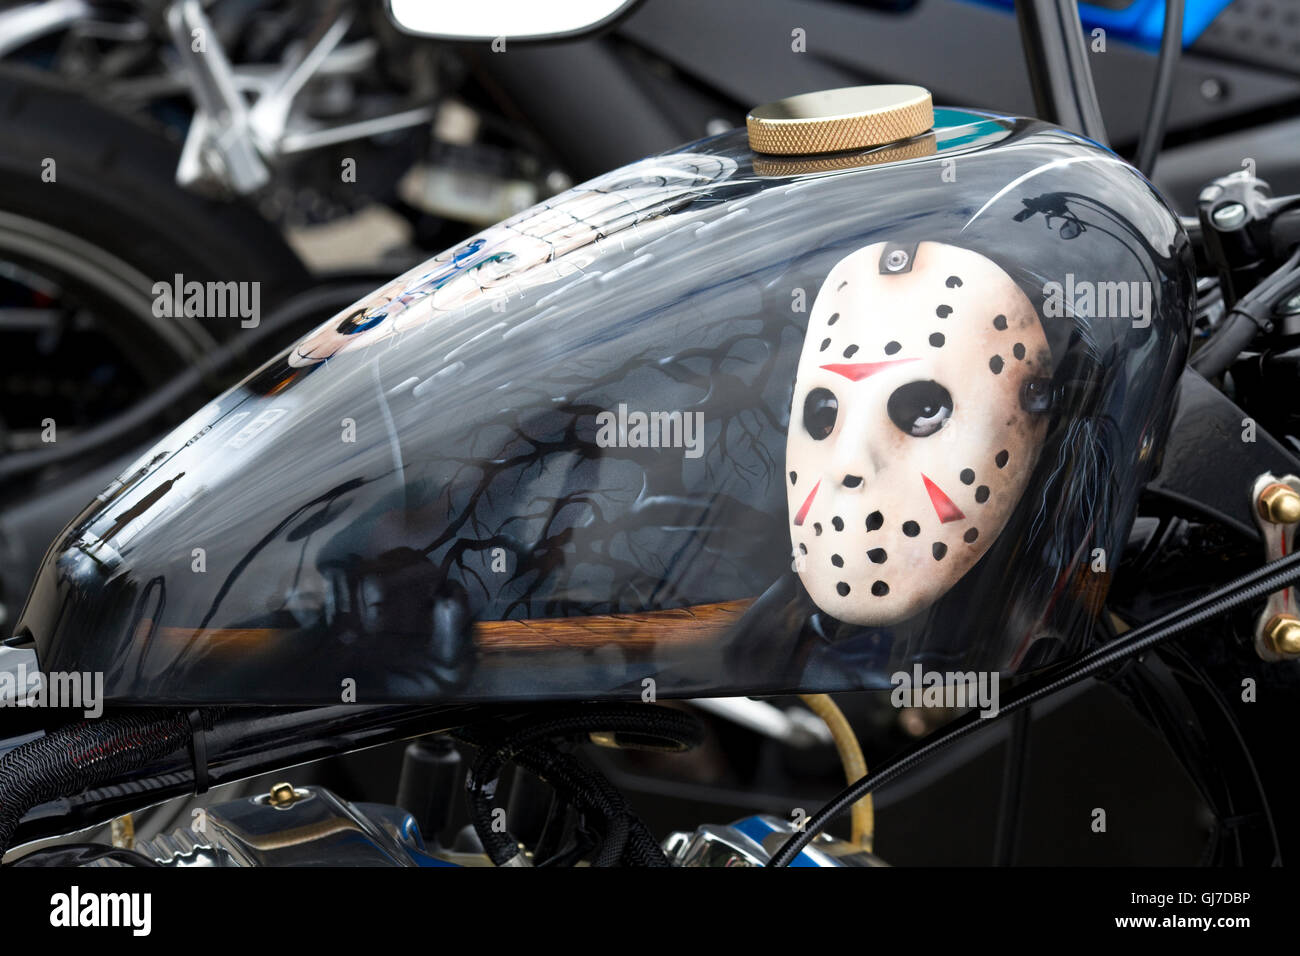 Harley Davidson Motorbike Tank spray painted with Jason Voorhees from Friday the 13th Stock Photo